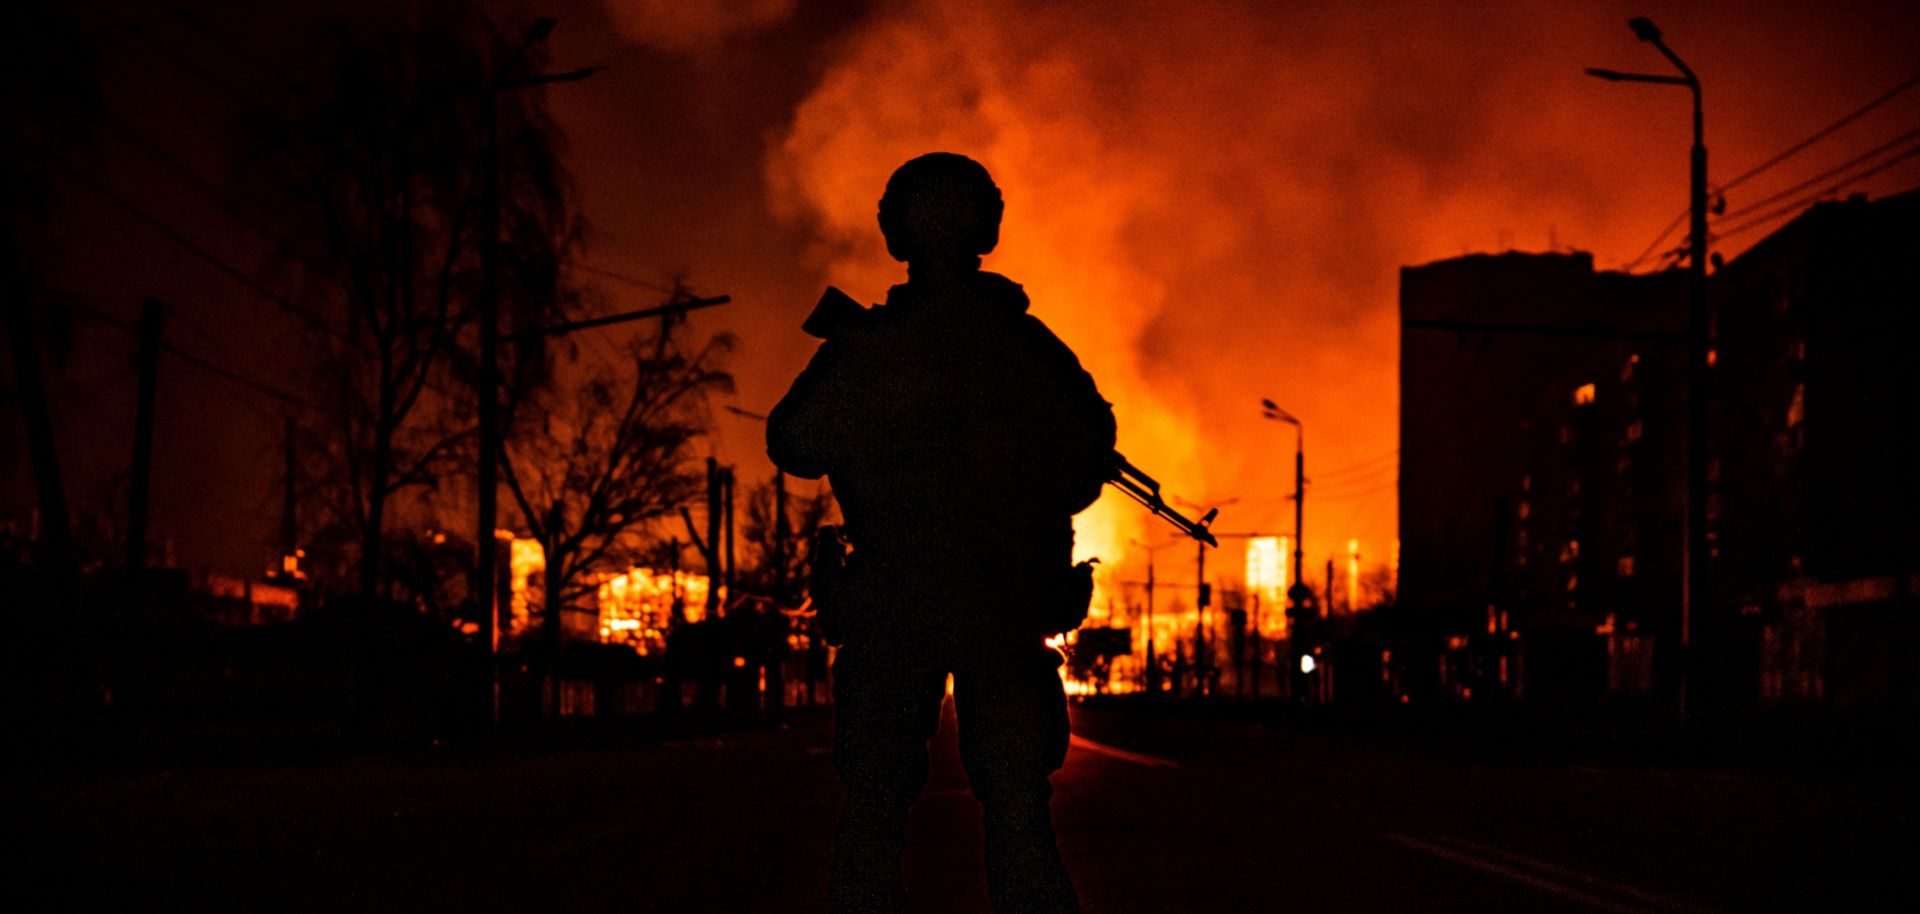 A Ukrainian soldier’s silhouette is seen in the city of Kharkiv on March 30, 2022, as a gas station burns behind him after Russian attacks.